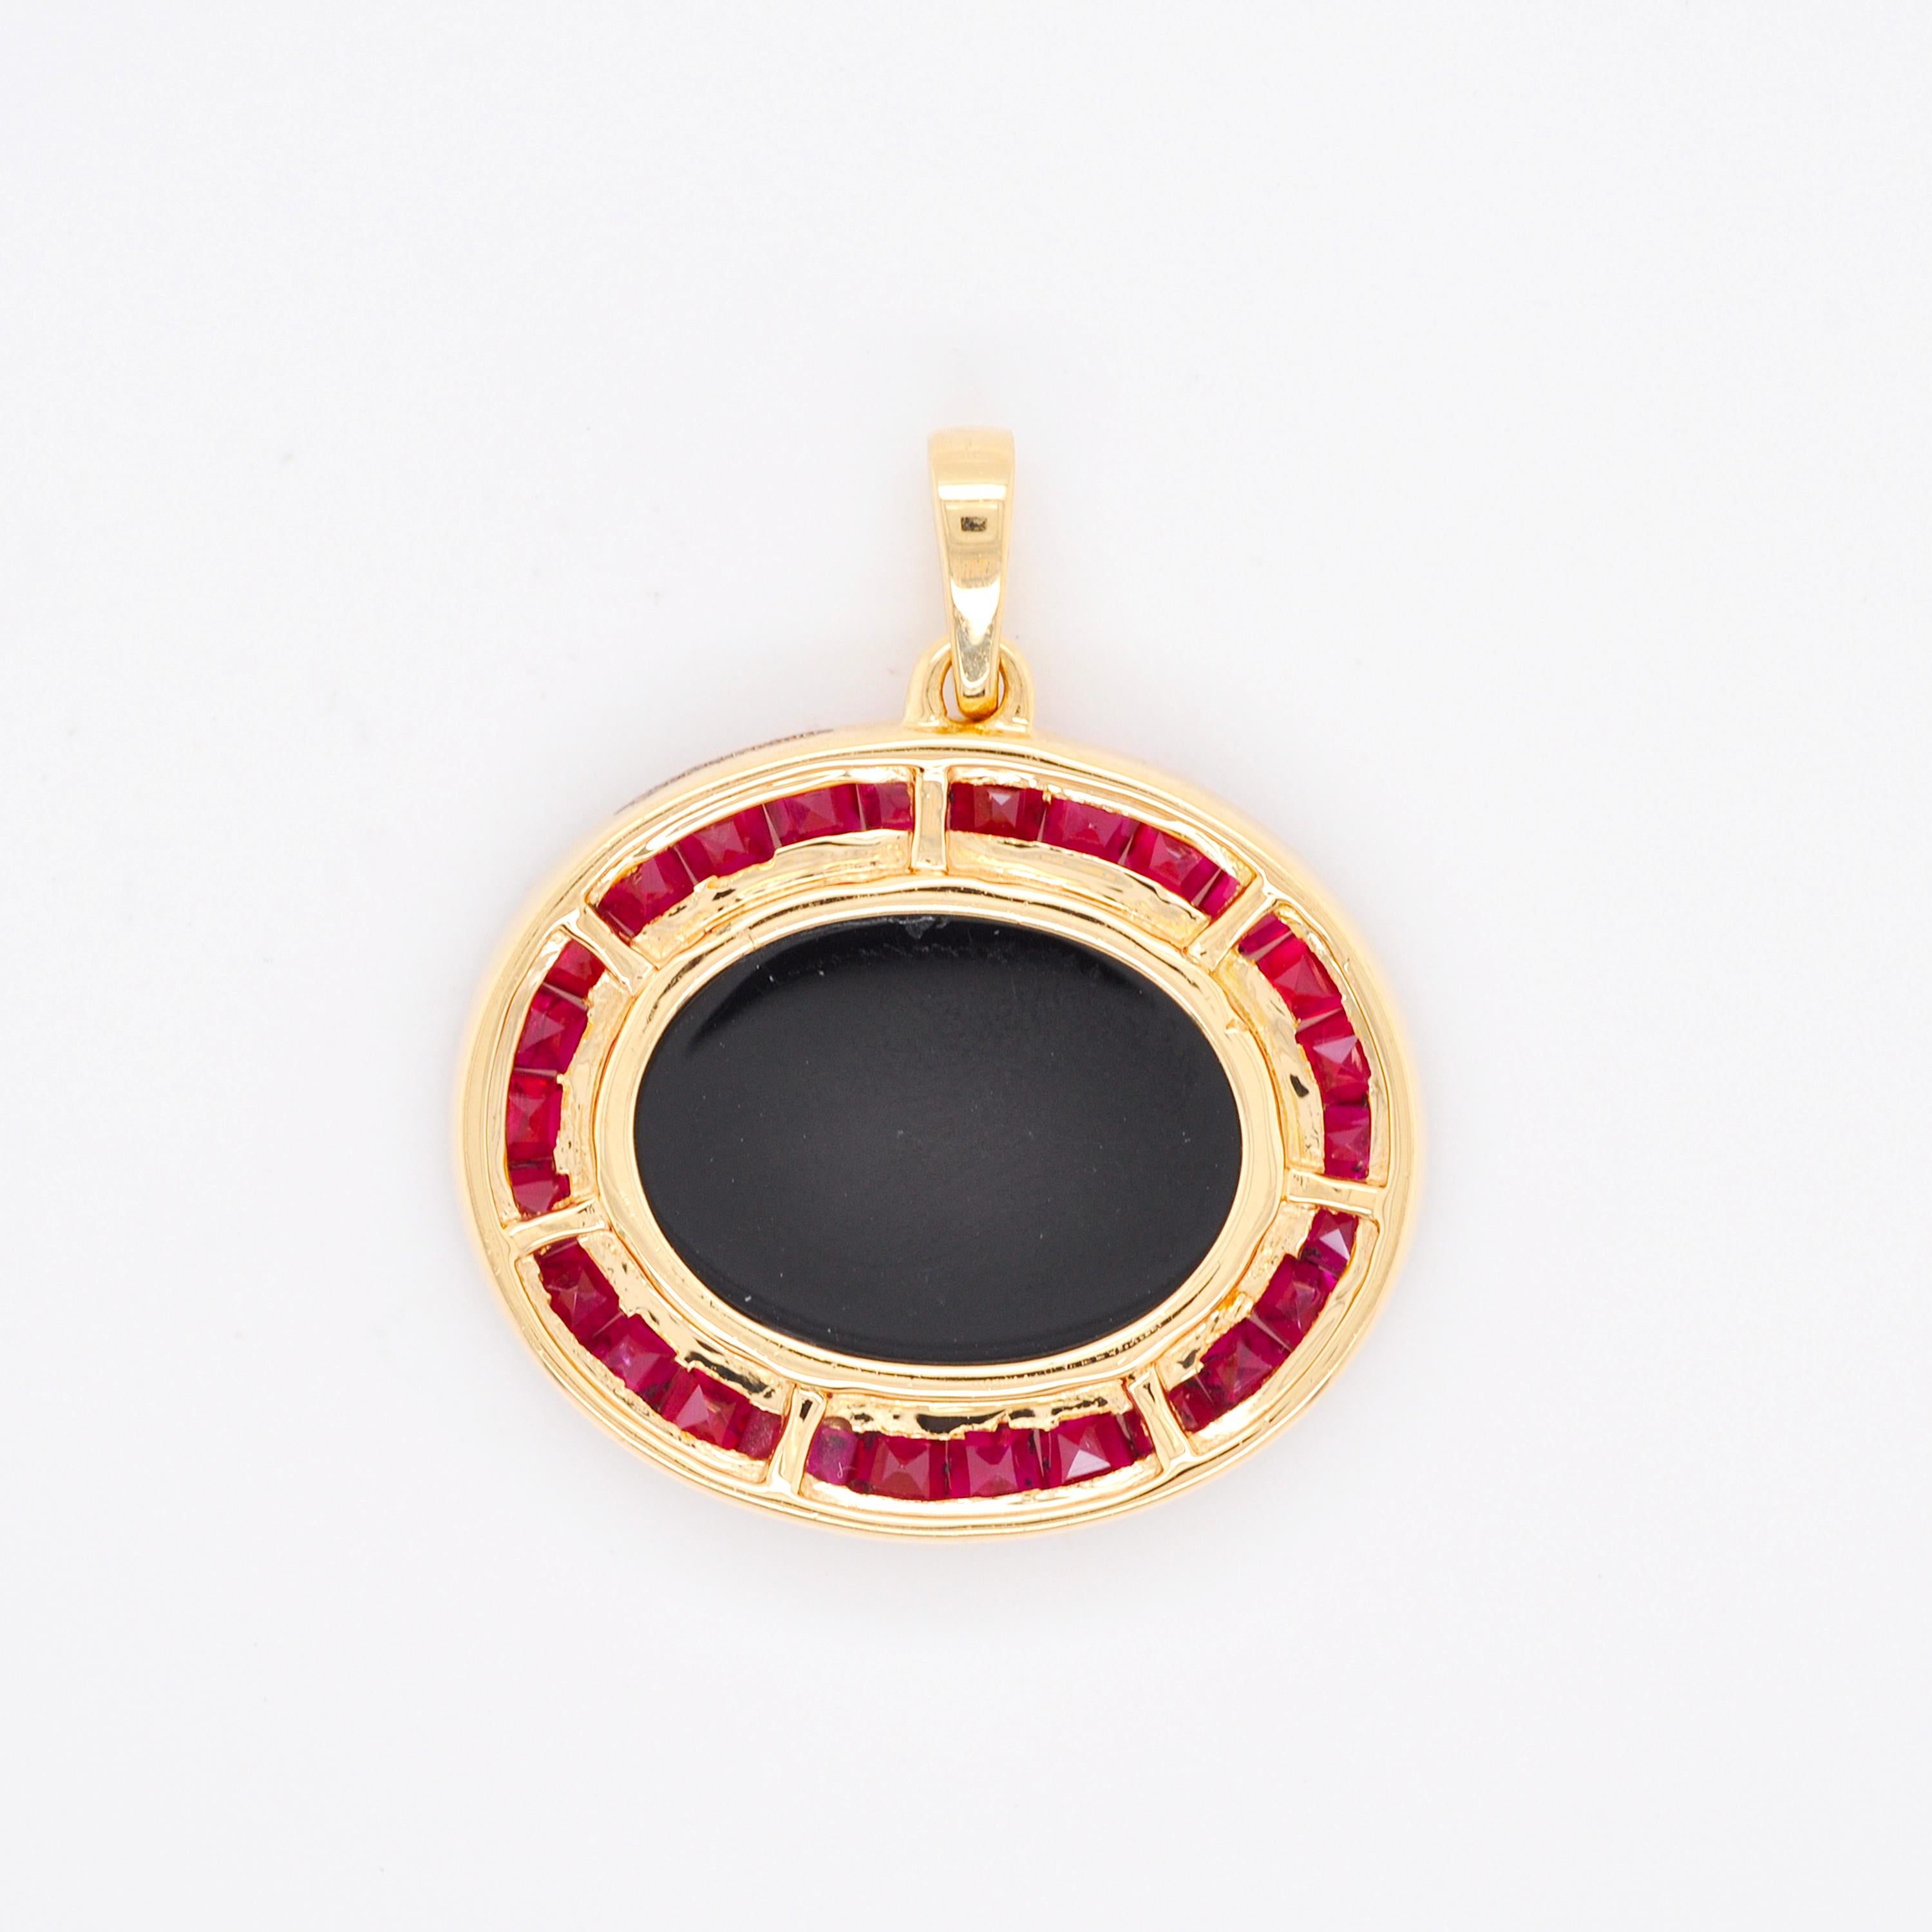 18K Gold Calibre Cut Burma Ruby Diamond Carved Love Birds Agate Cameo Pendant  In New Condition For Sale In Jaipur, Rajasthan